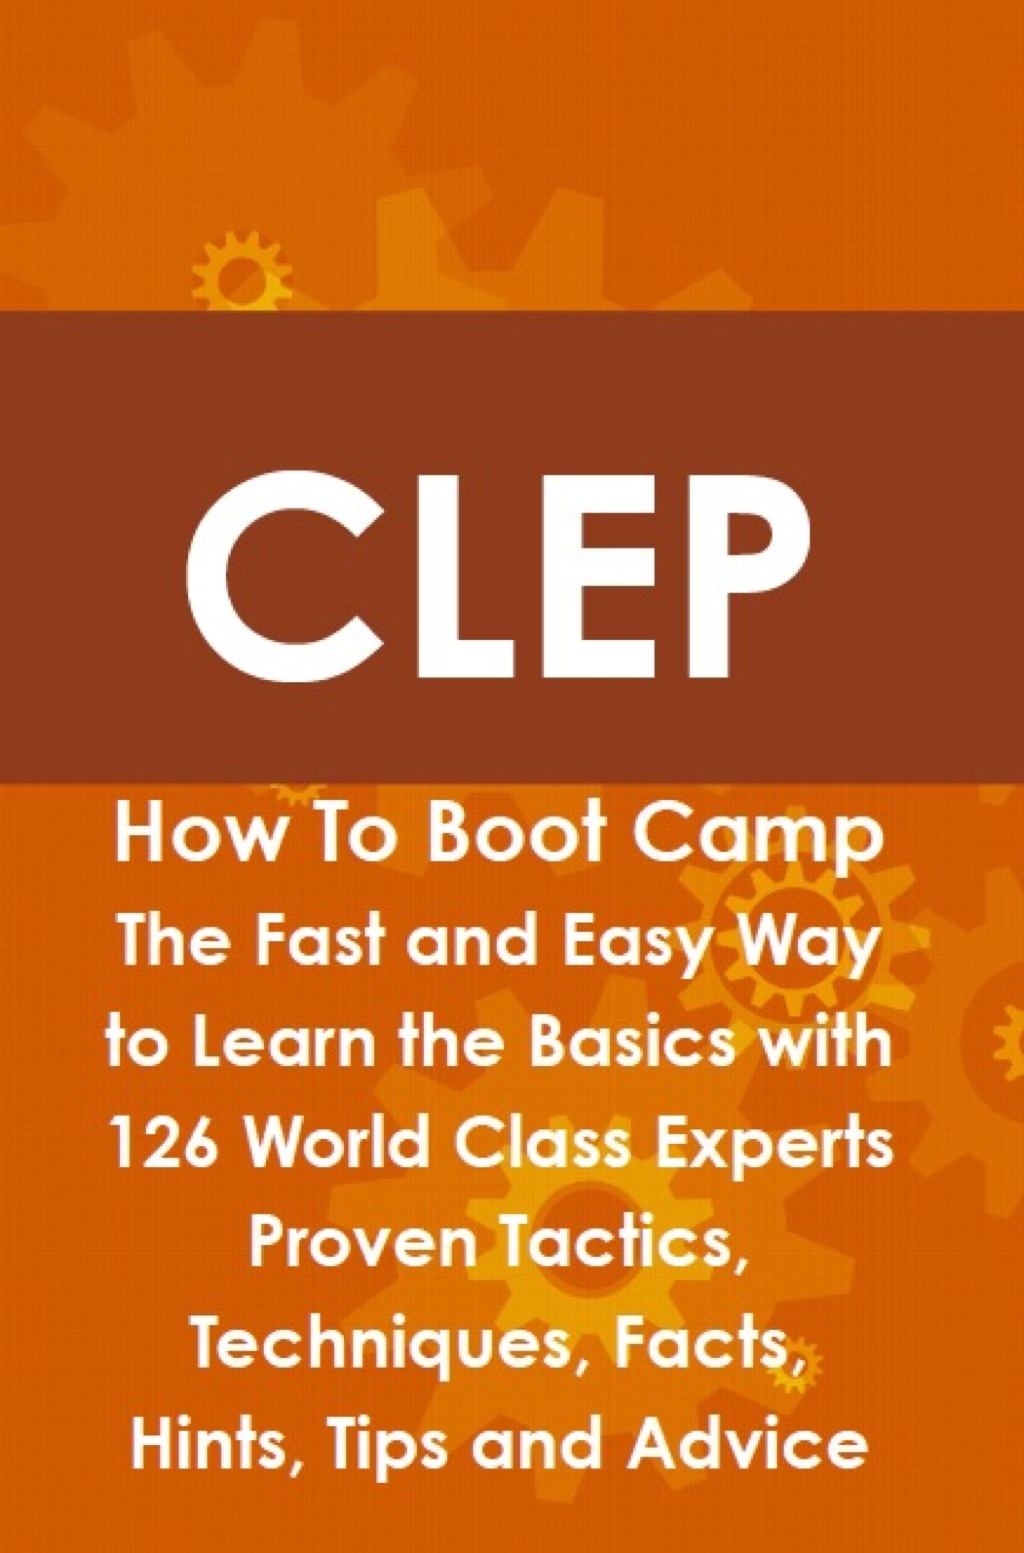 CLEP How To Boot Camp: The Fast and Easy Way to Learn the Basics with 126 World Class Experts Proven Tactics  Techniques  (eBook) - Jeremy Lyon,